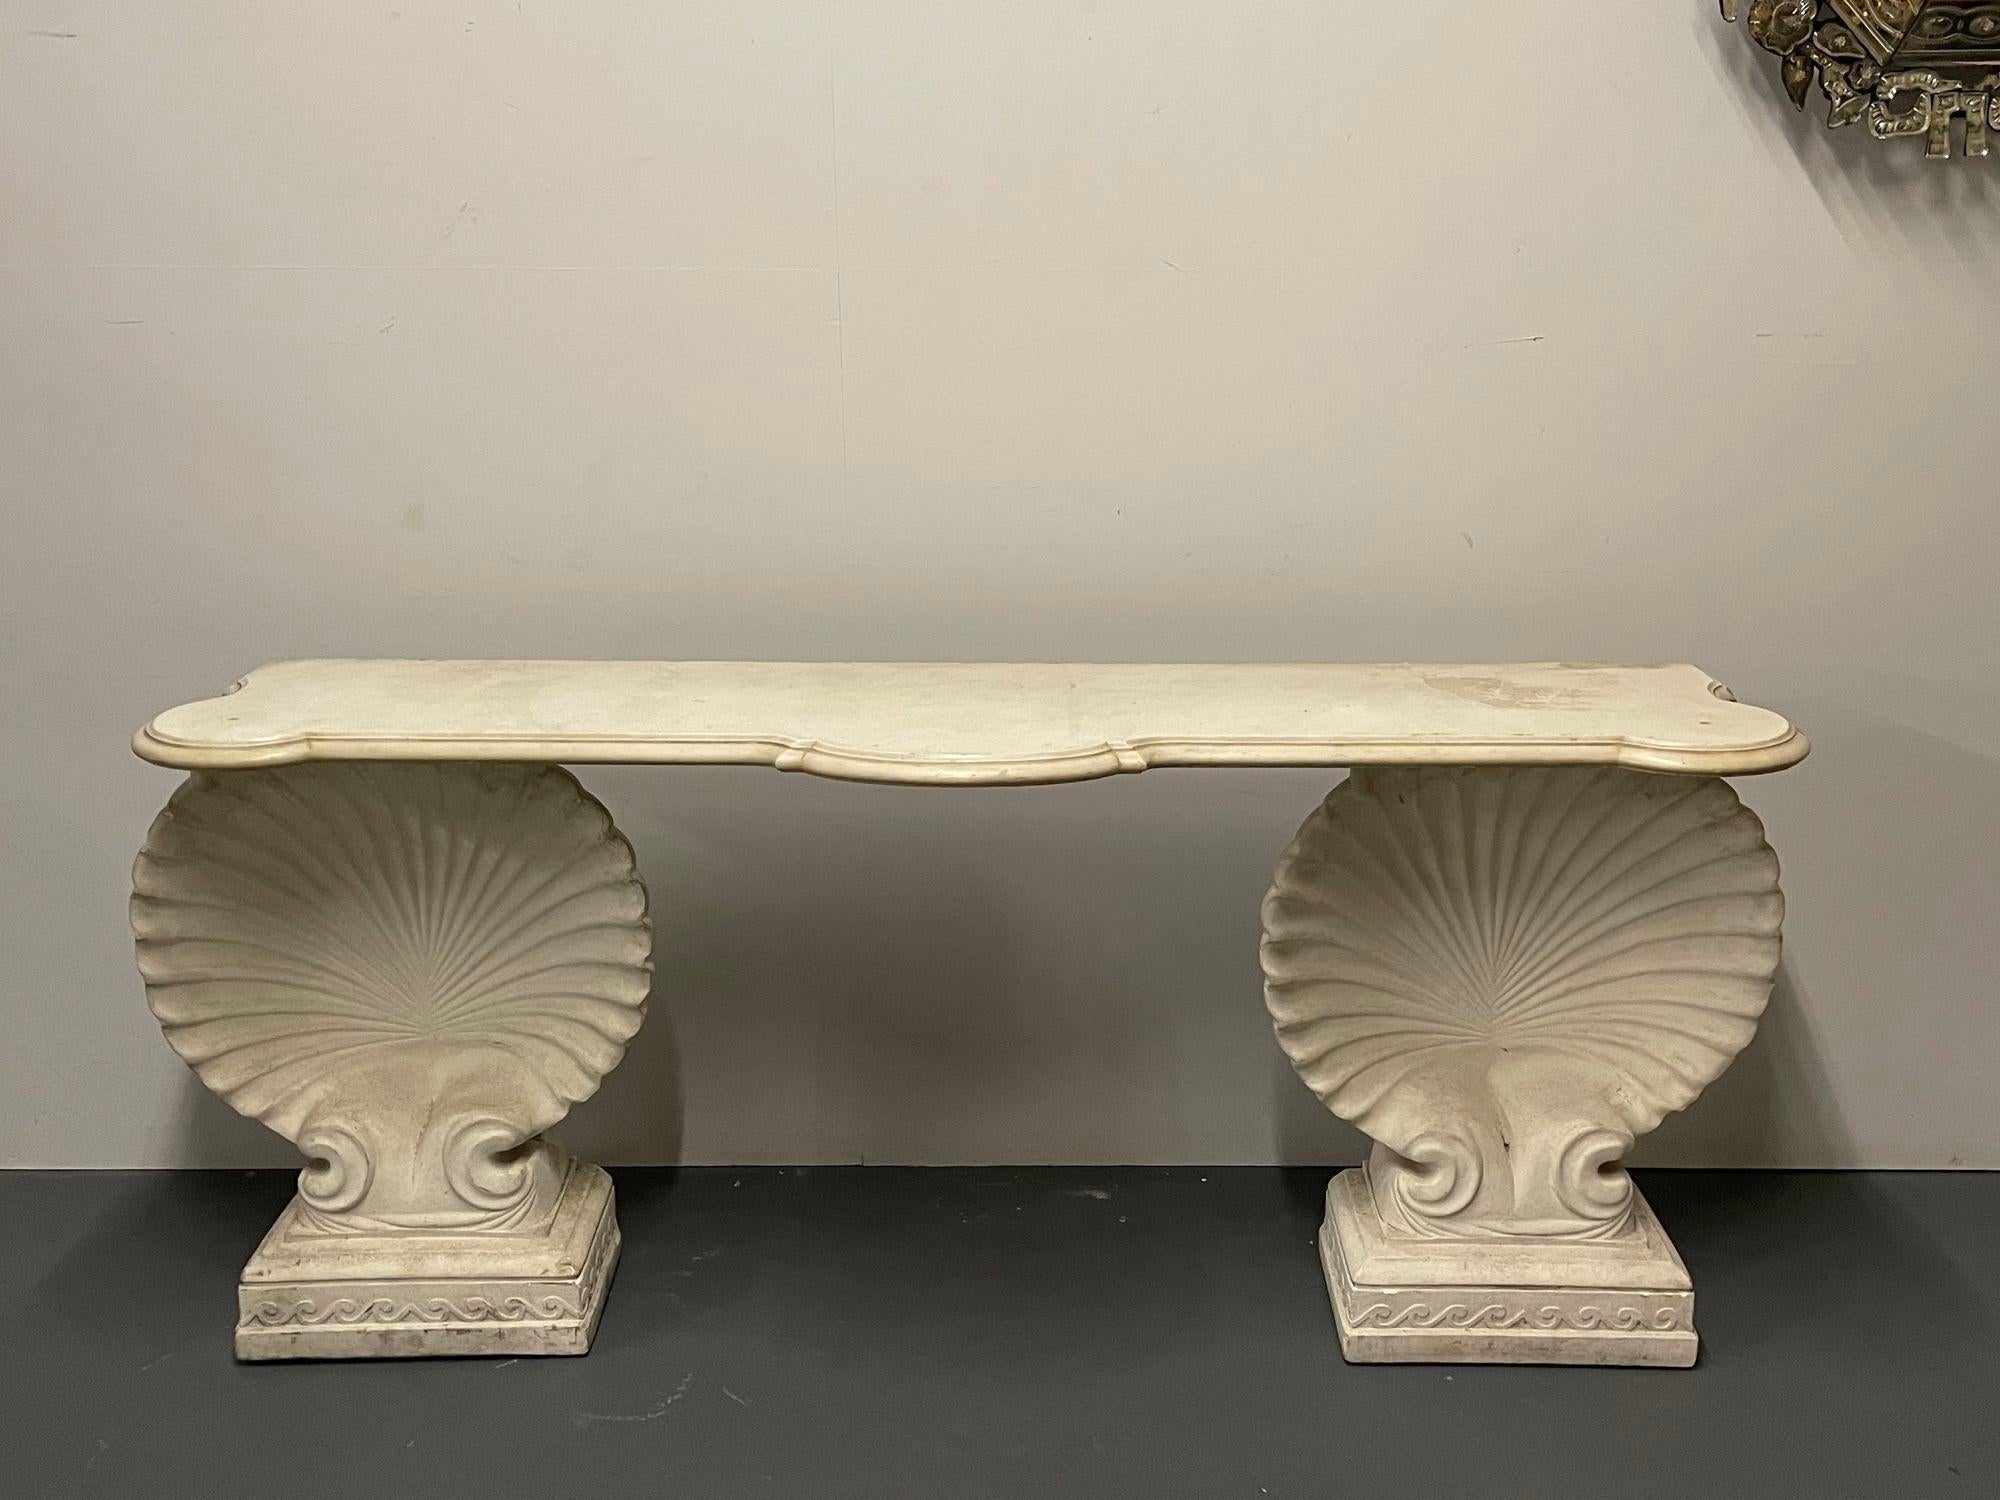 Shell console table, marble, stone, Early 20th Century, Custom Made.

A pair of large shell form pedestals having square carved bases supporting a large serpentine Carrara white marble top with a deep scalloped edge. An impressive piece that can